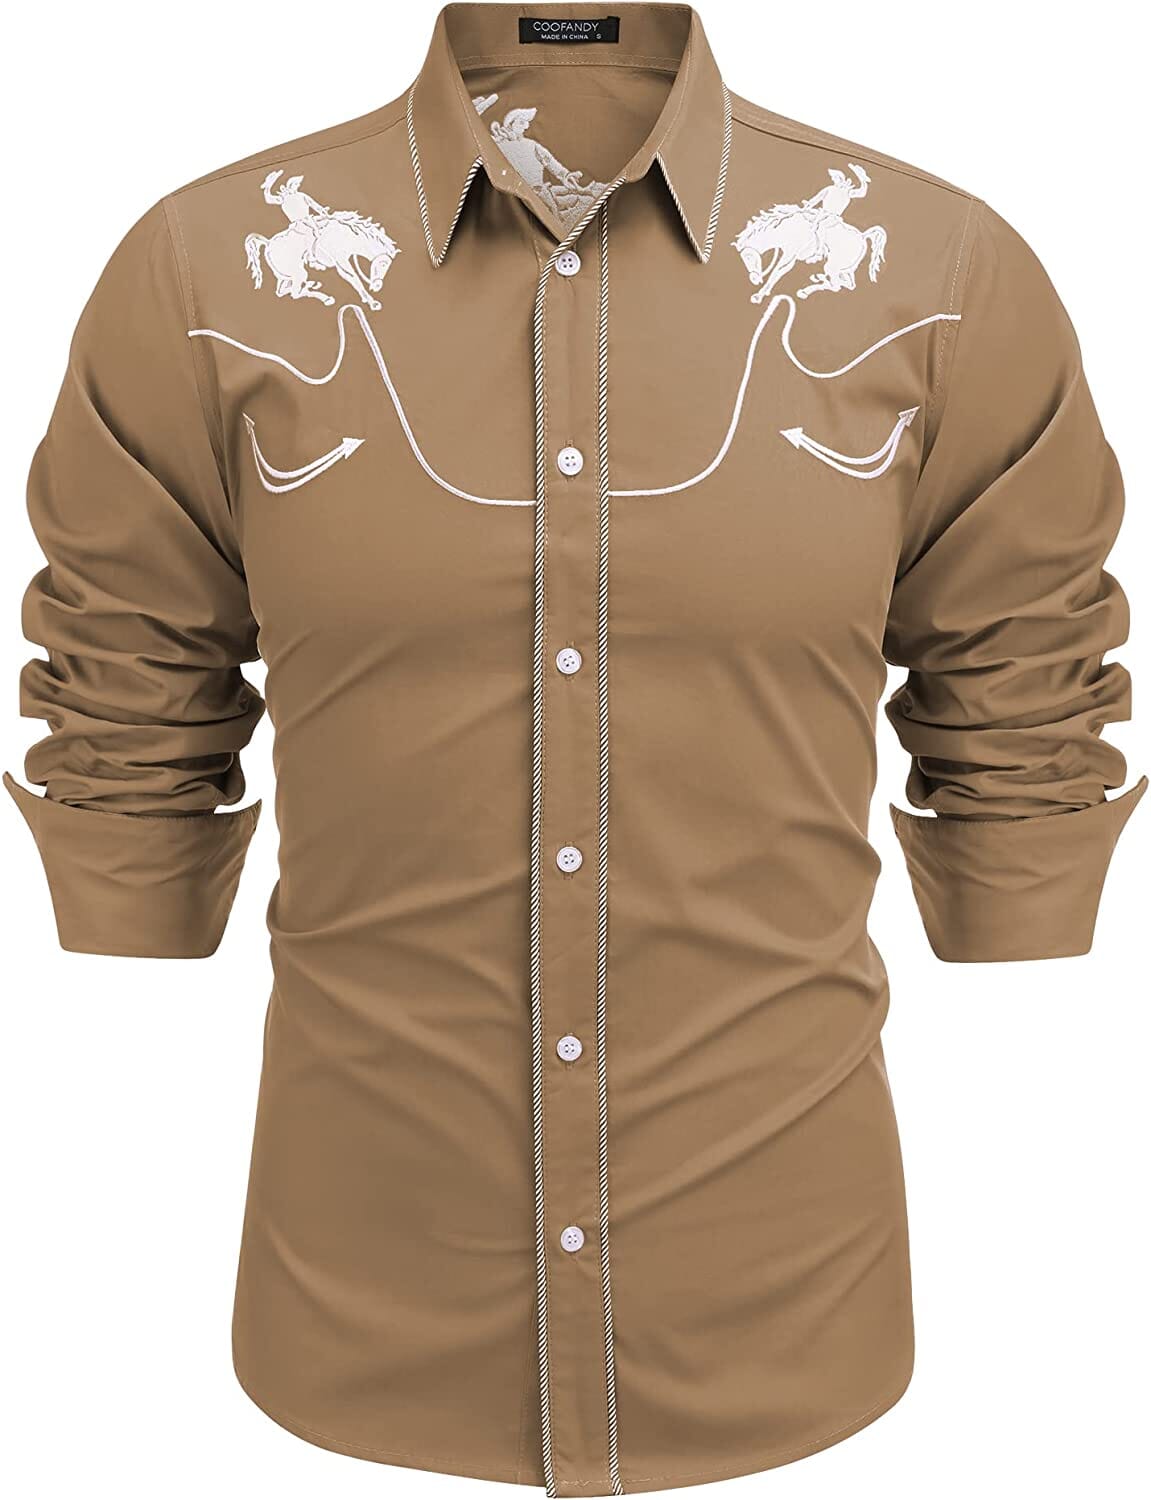 Embroidered Cowboy Button Down Shirt (US Only) Shirts COOFANDY Store Horse Khaki S 